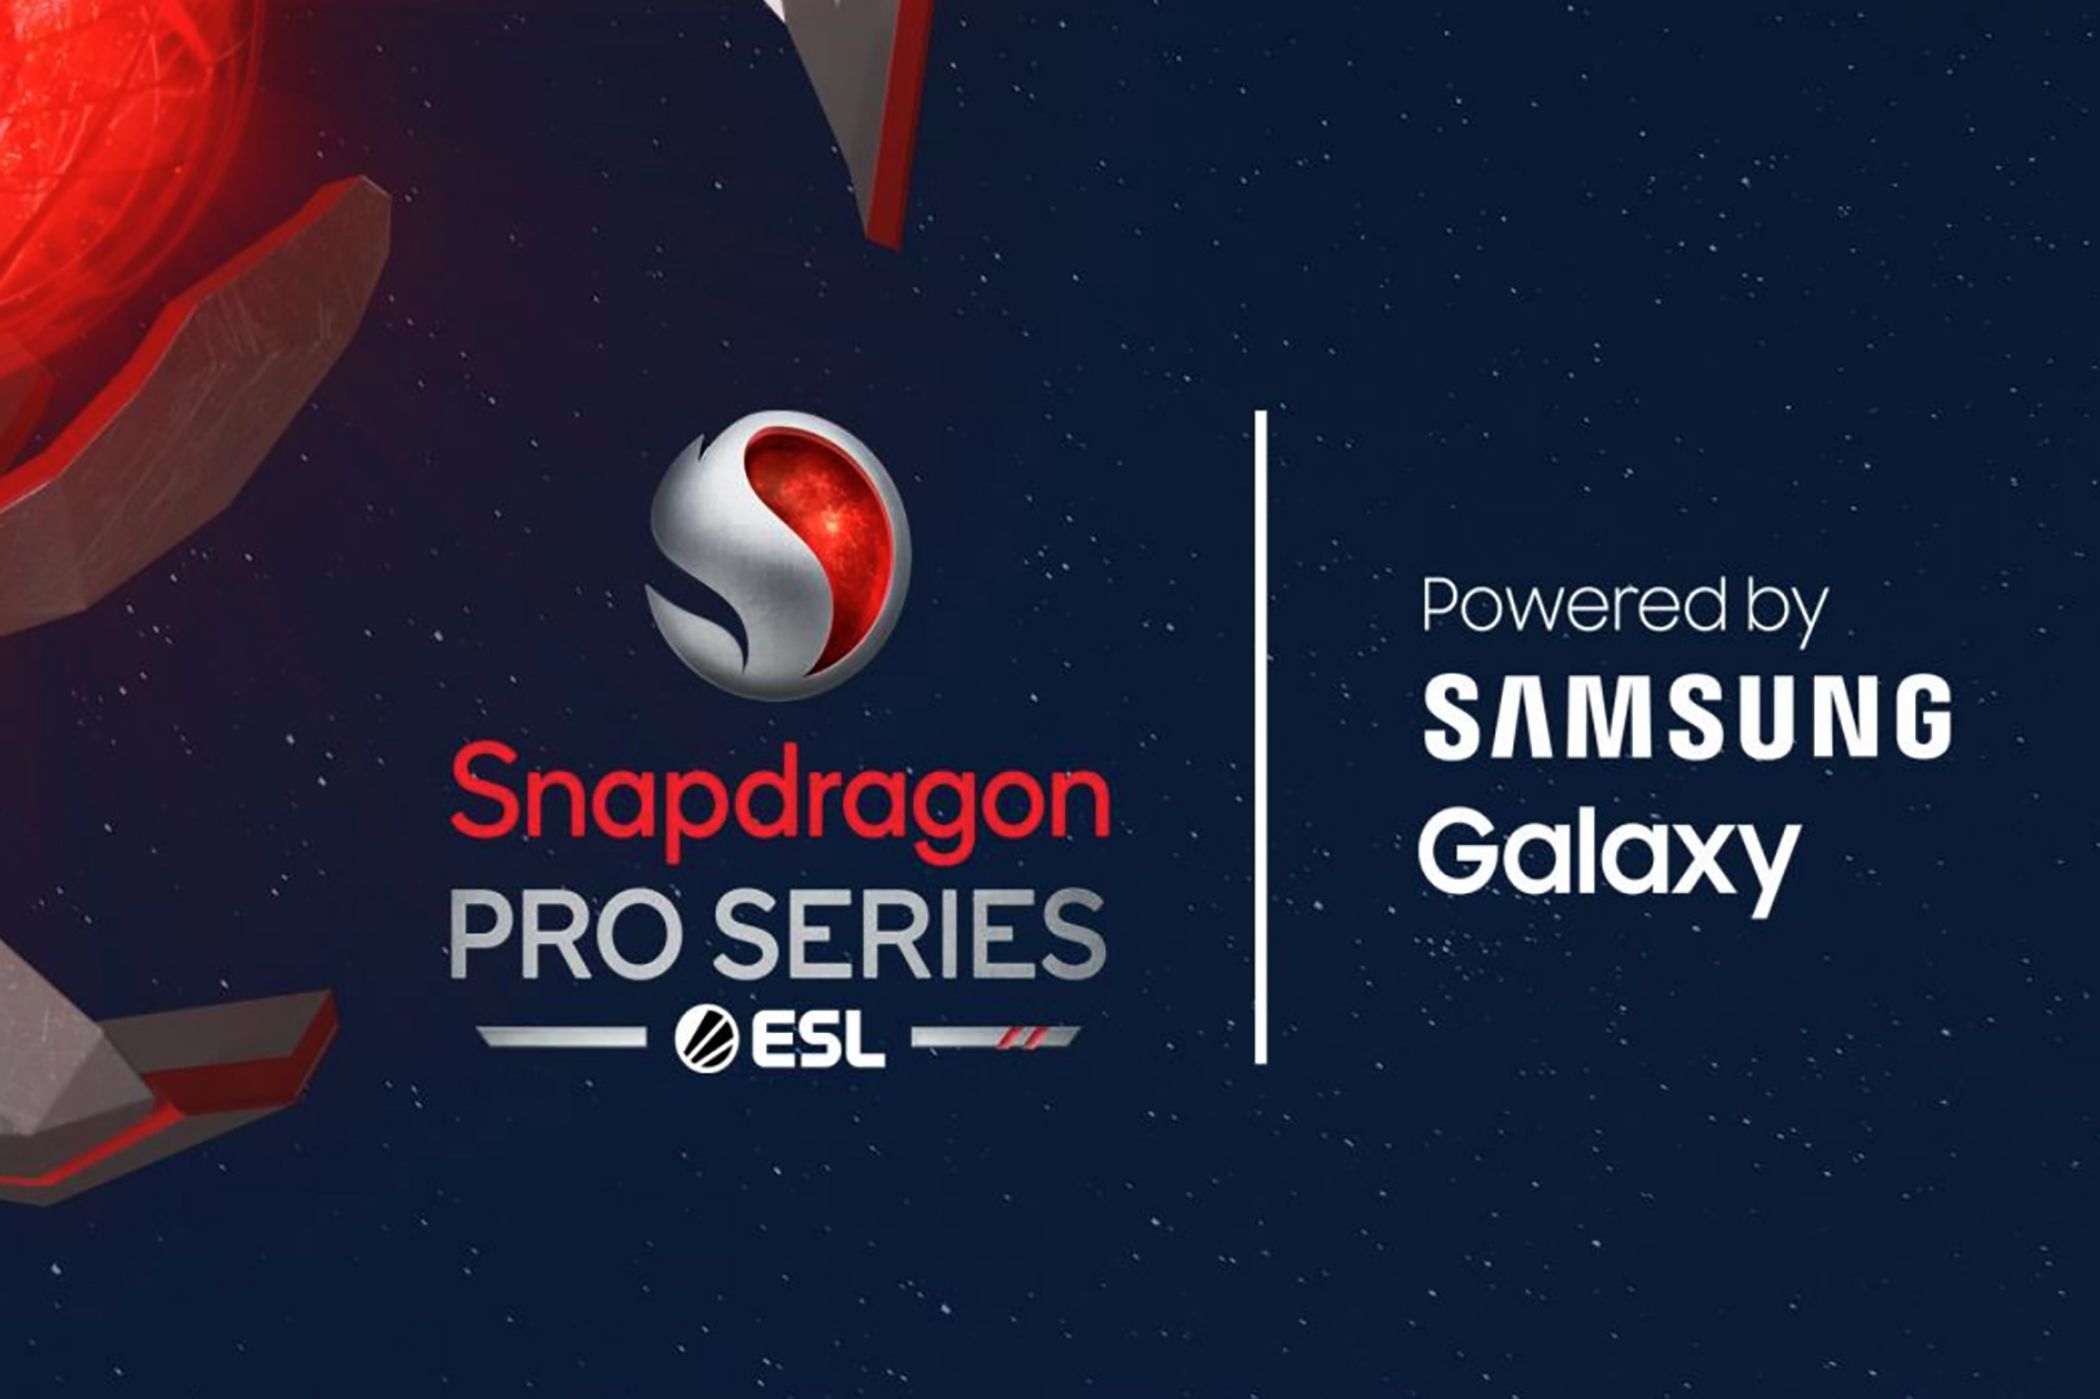 Poster showing Snapdragon Pro Series logo next to text saying powered by Samsung Galaxy.